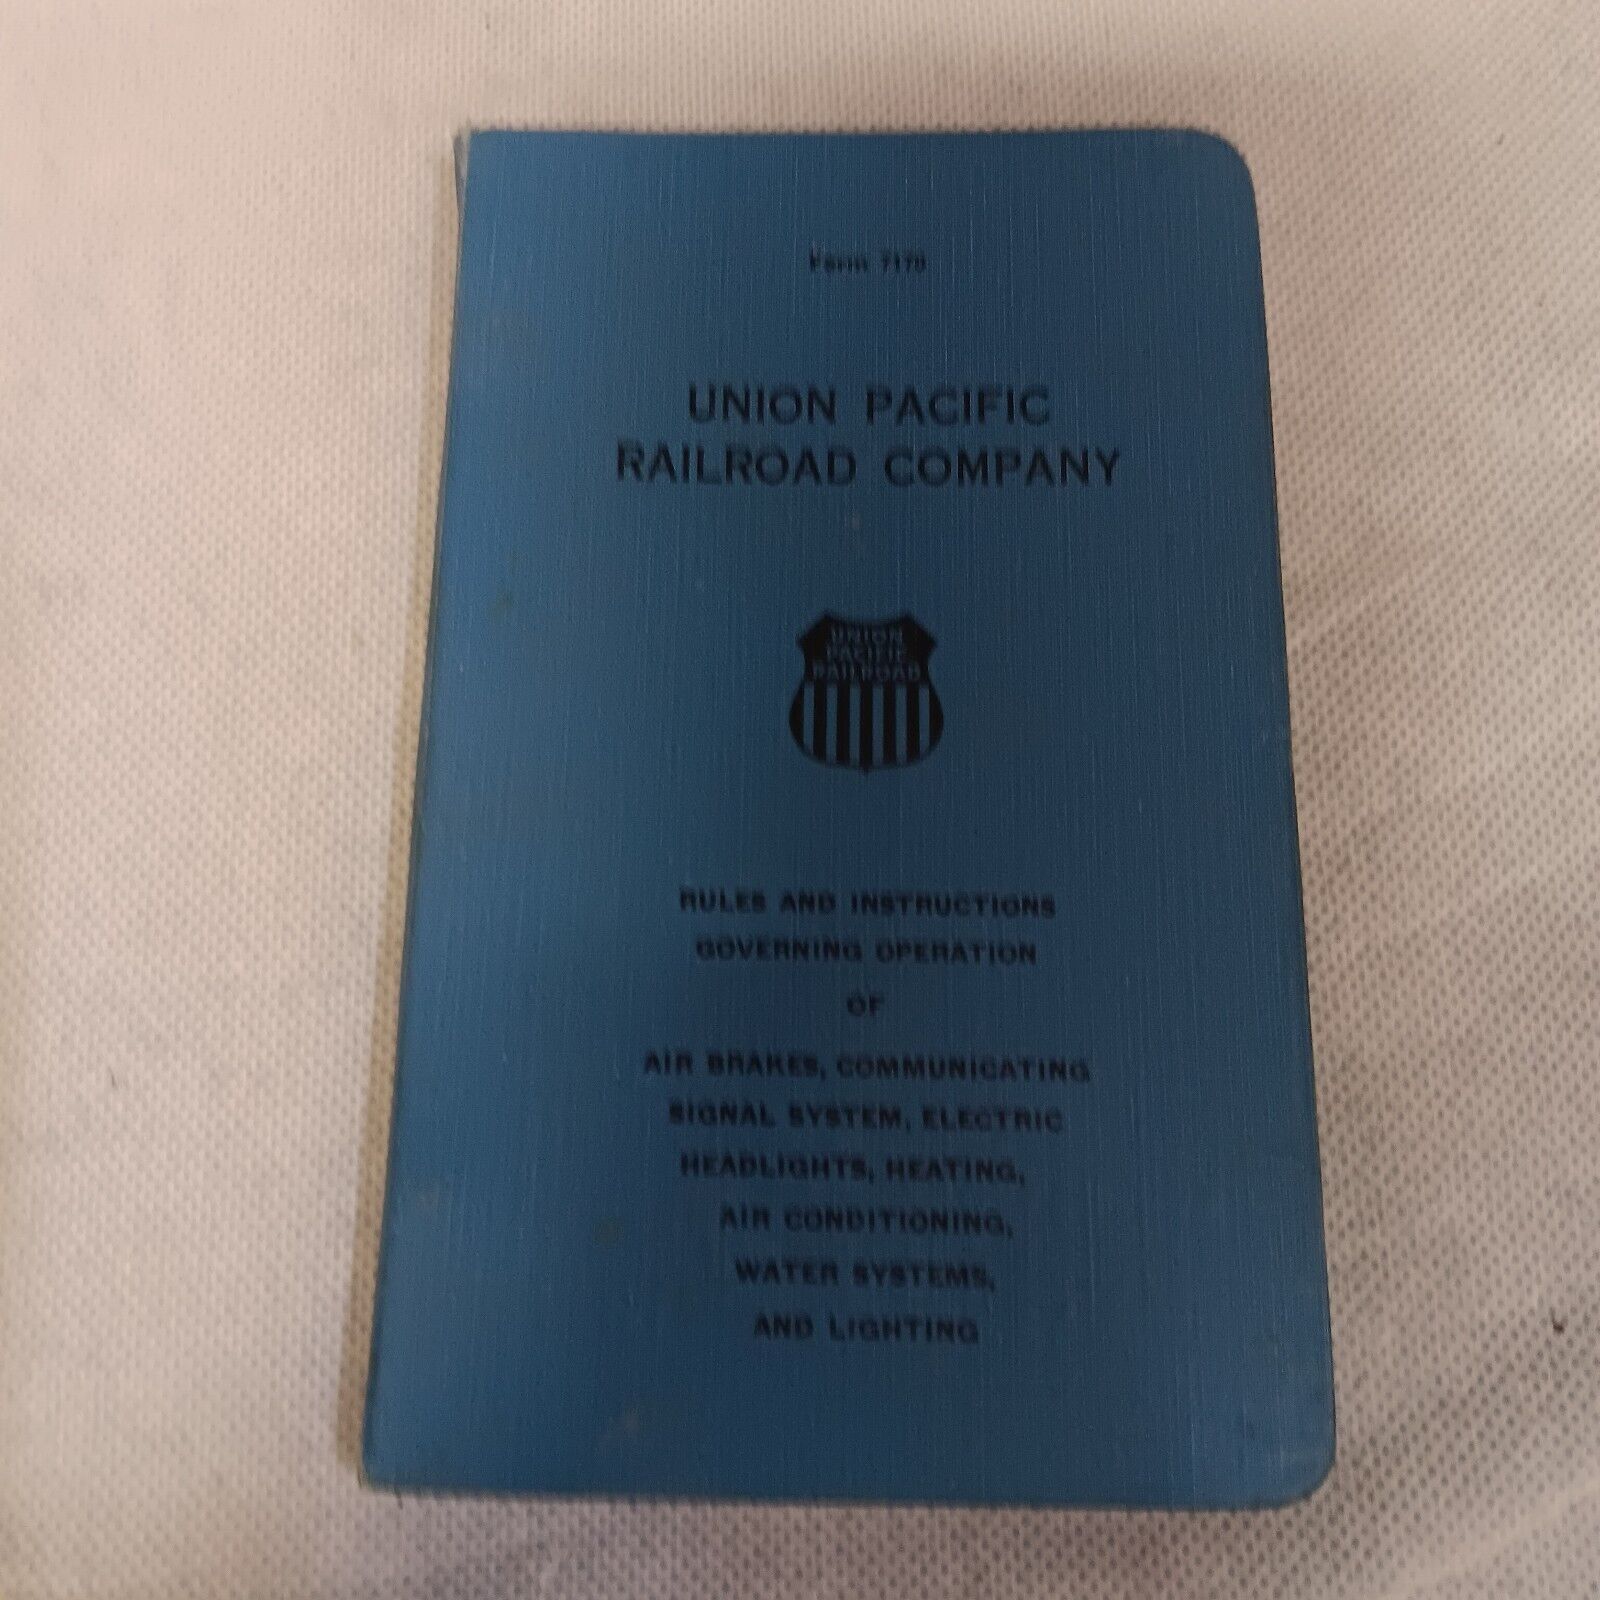 Union Pacific Railroad 1958 Rules and Instructions Governing Operation Book